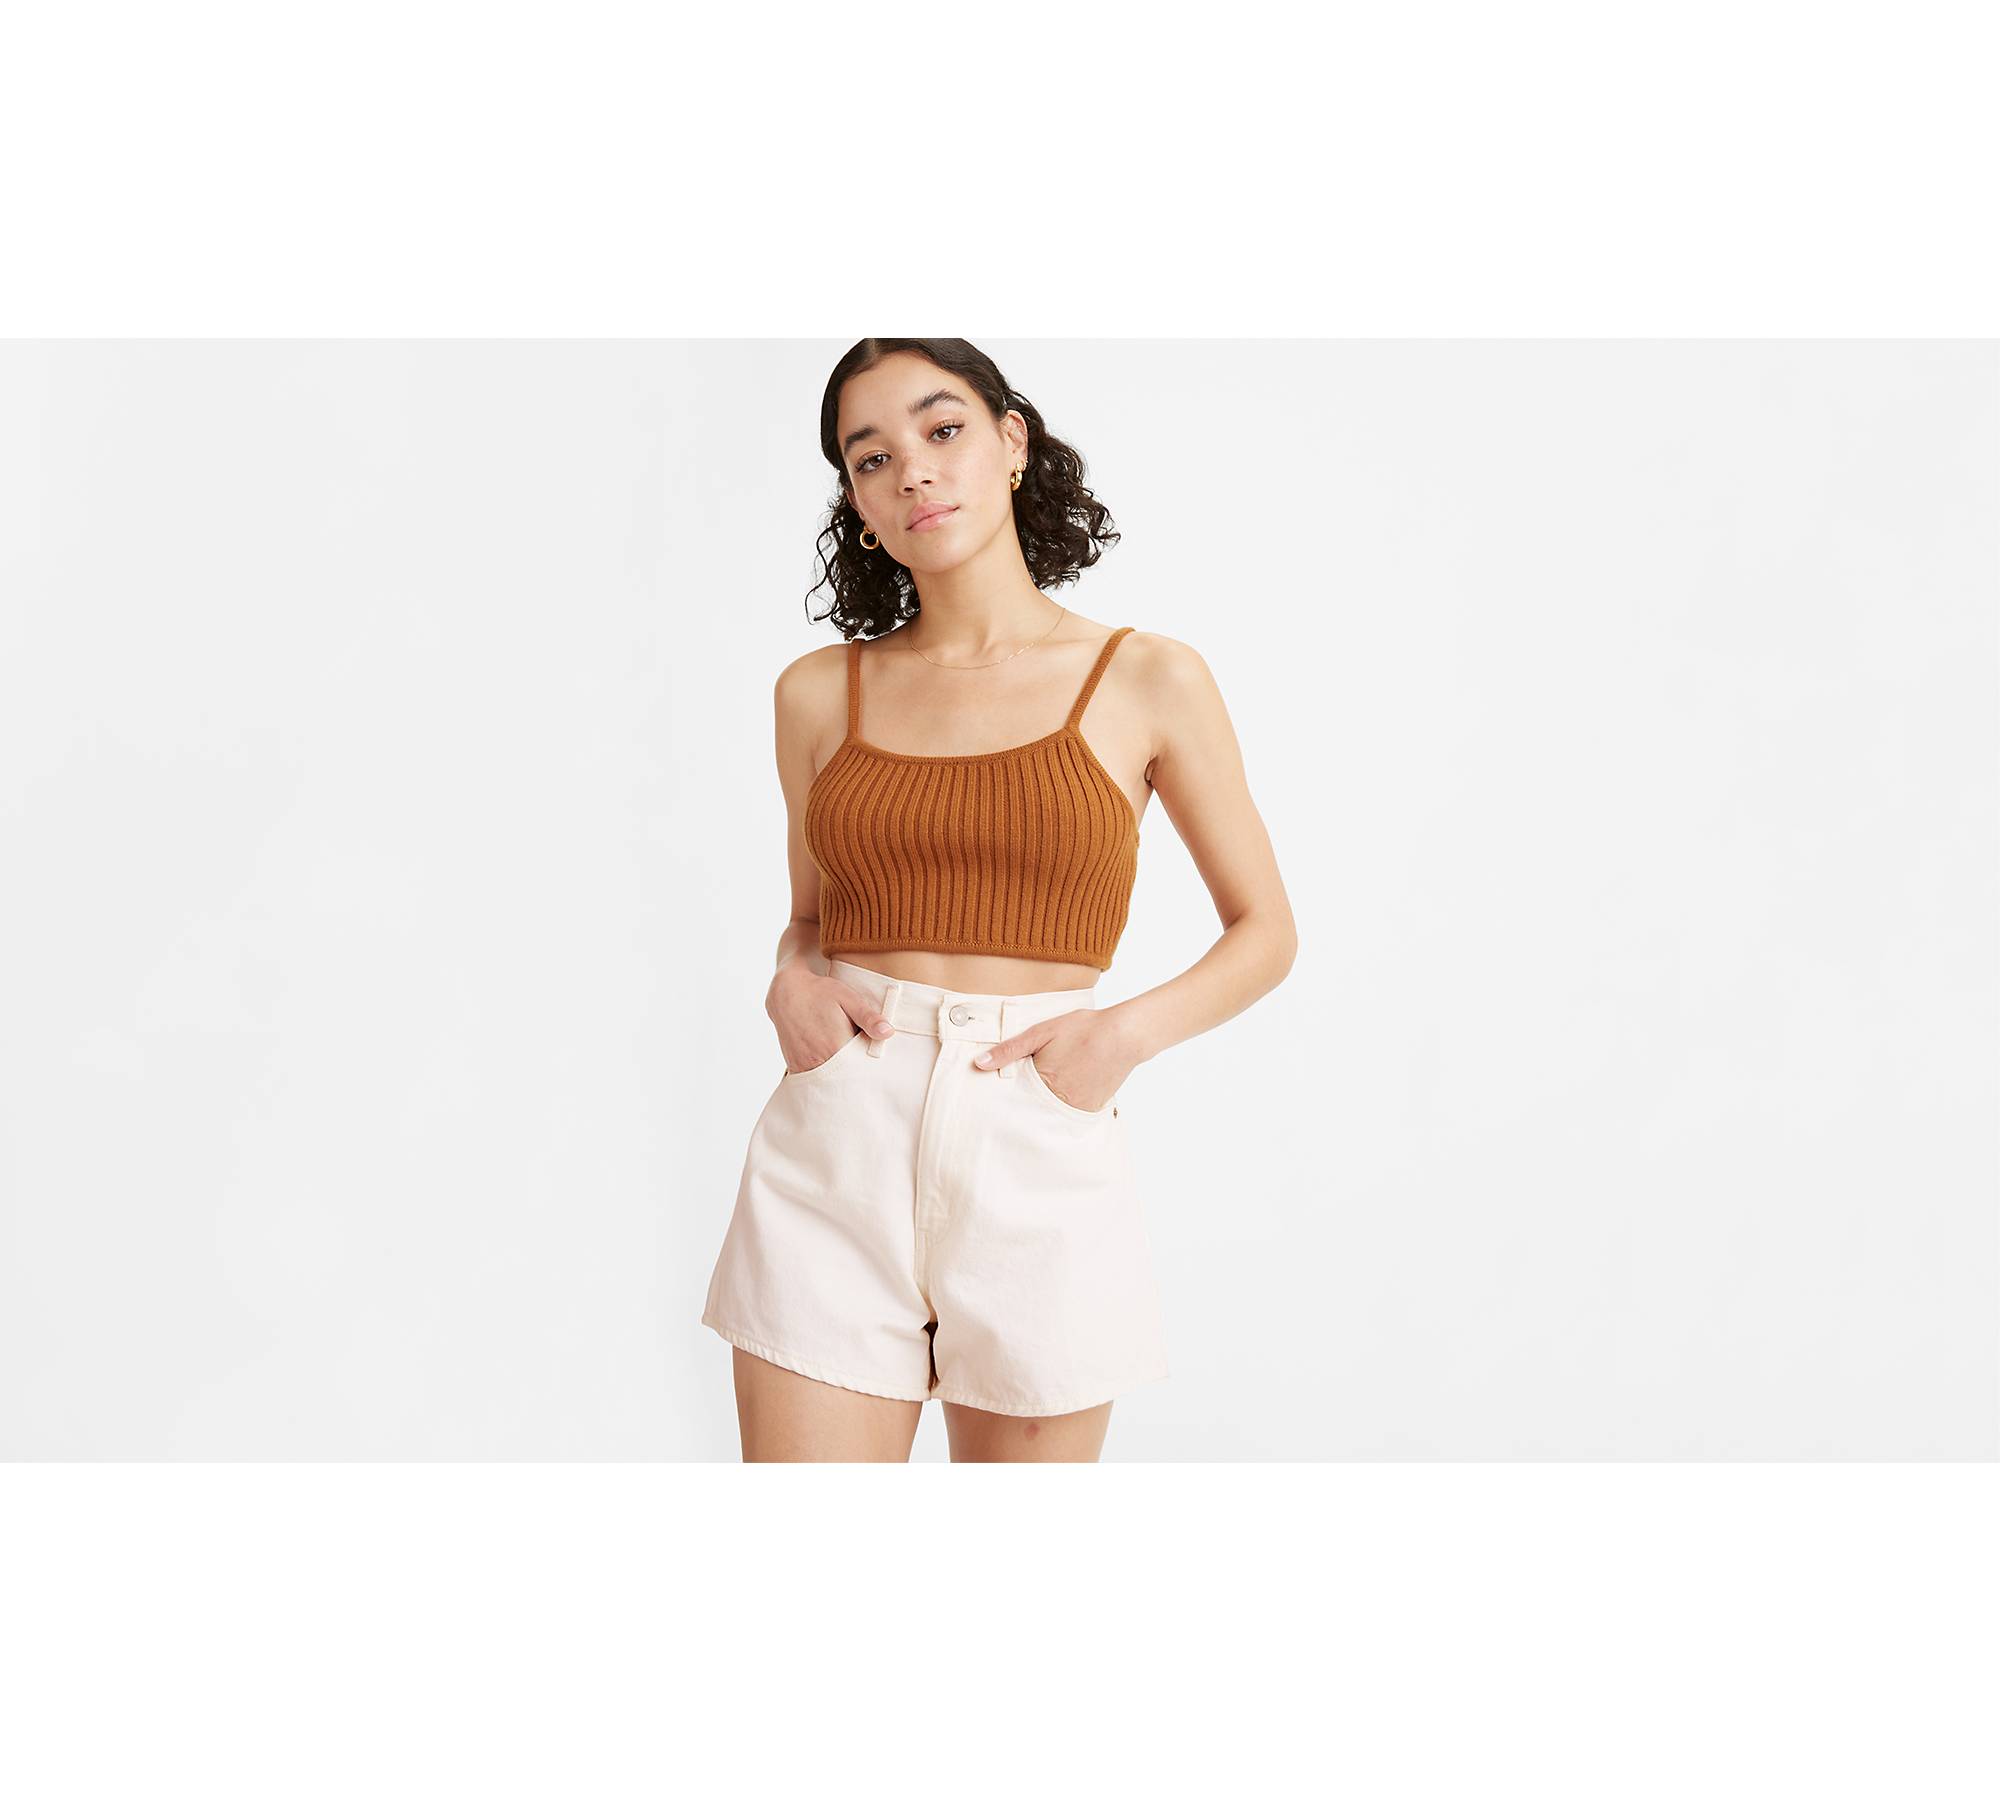 Summer Shopping With Me at Forever 21 Urban Planets Canada